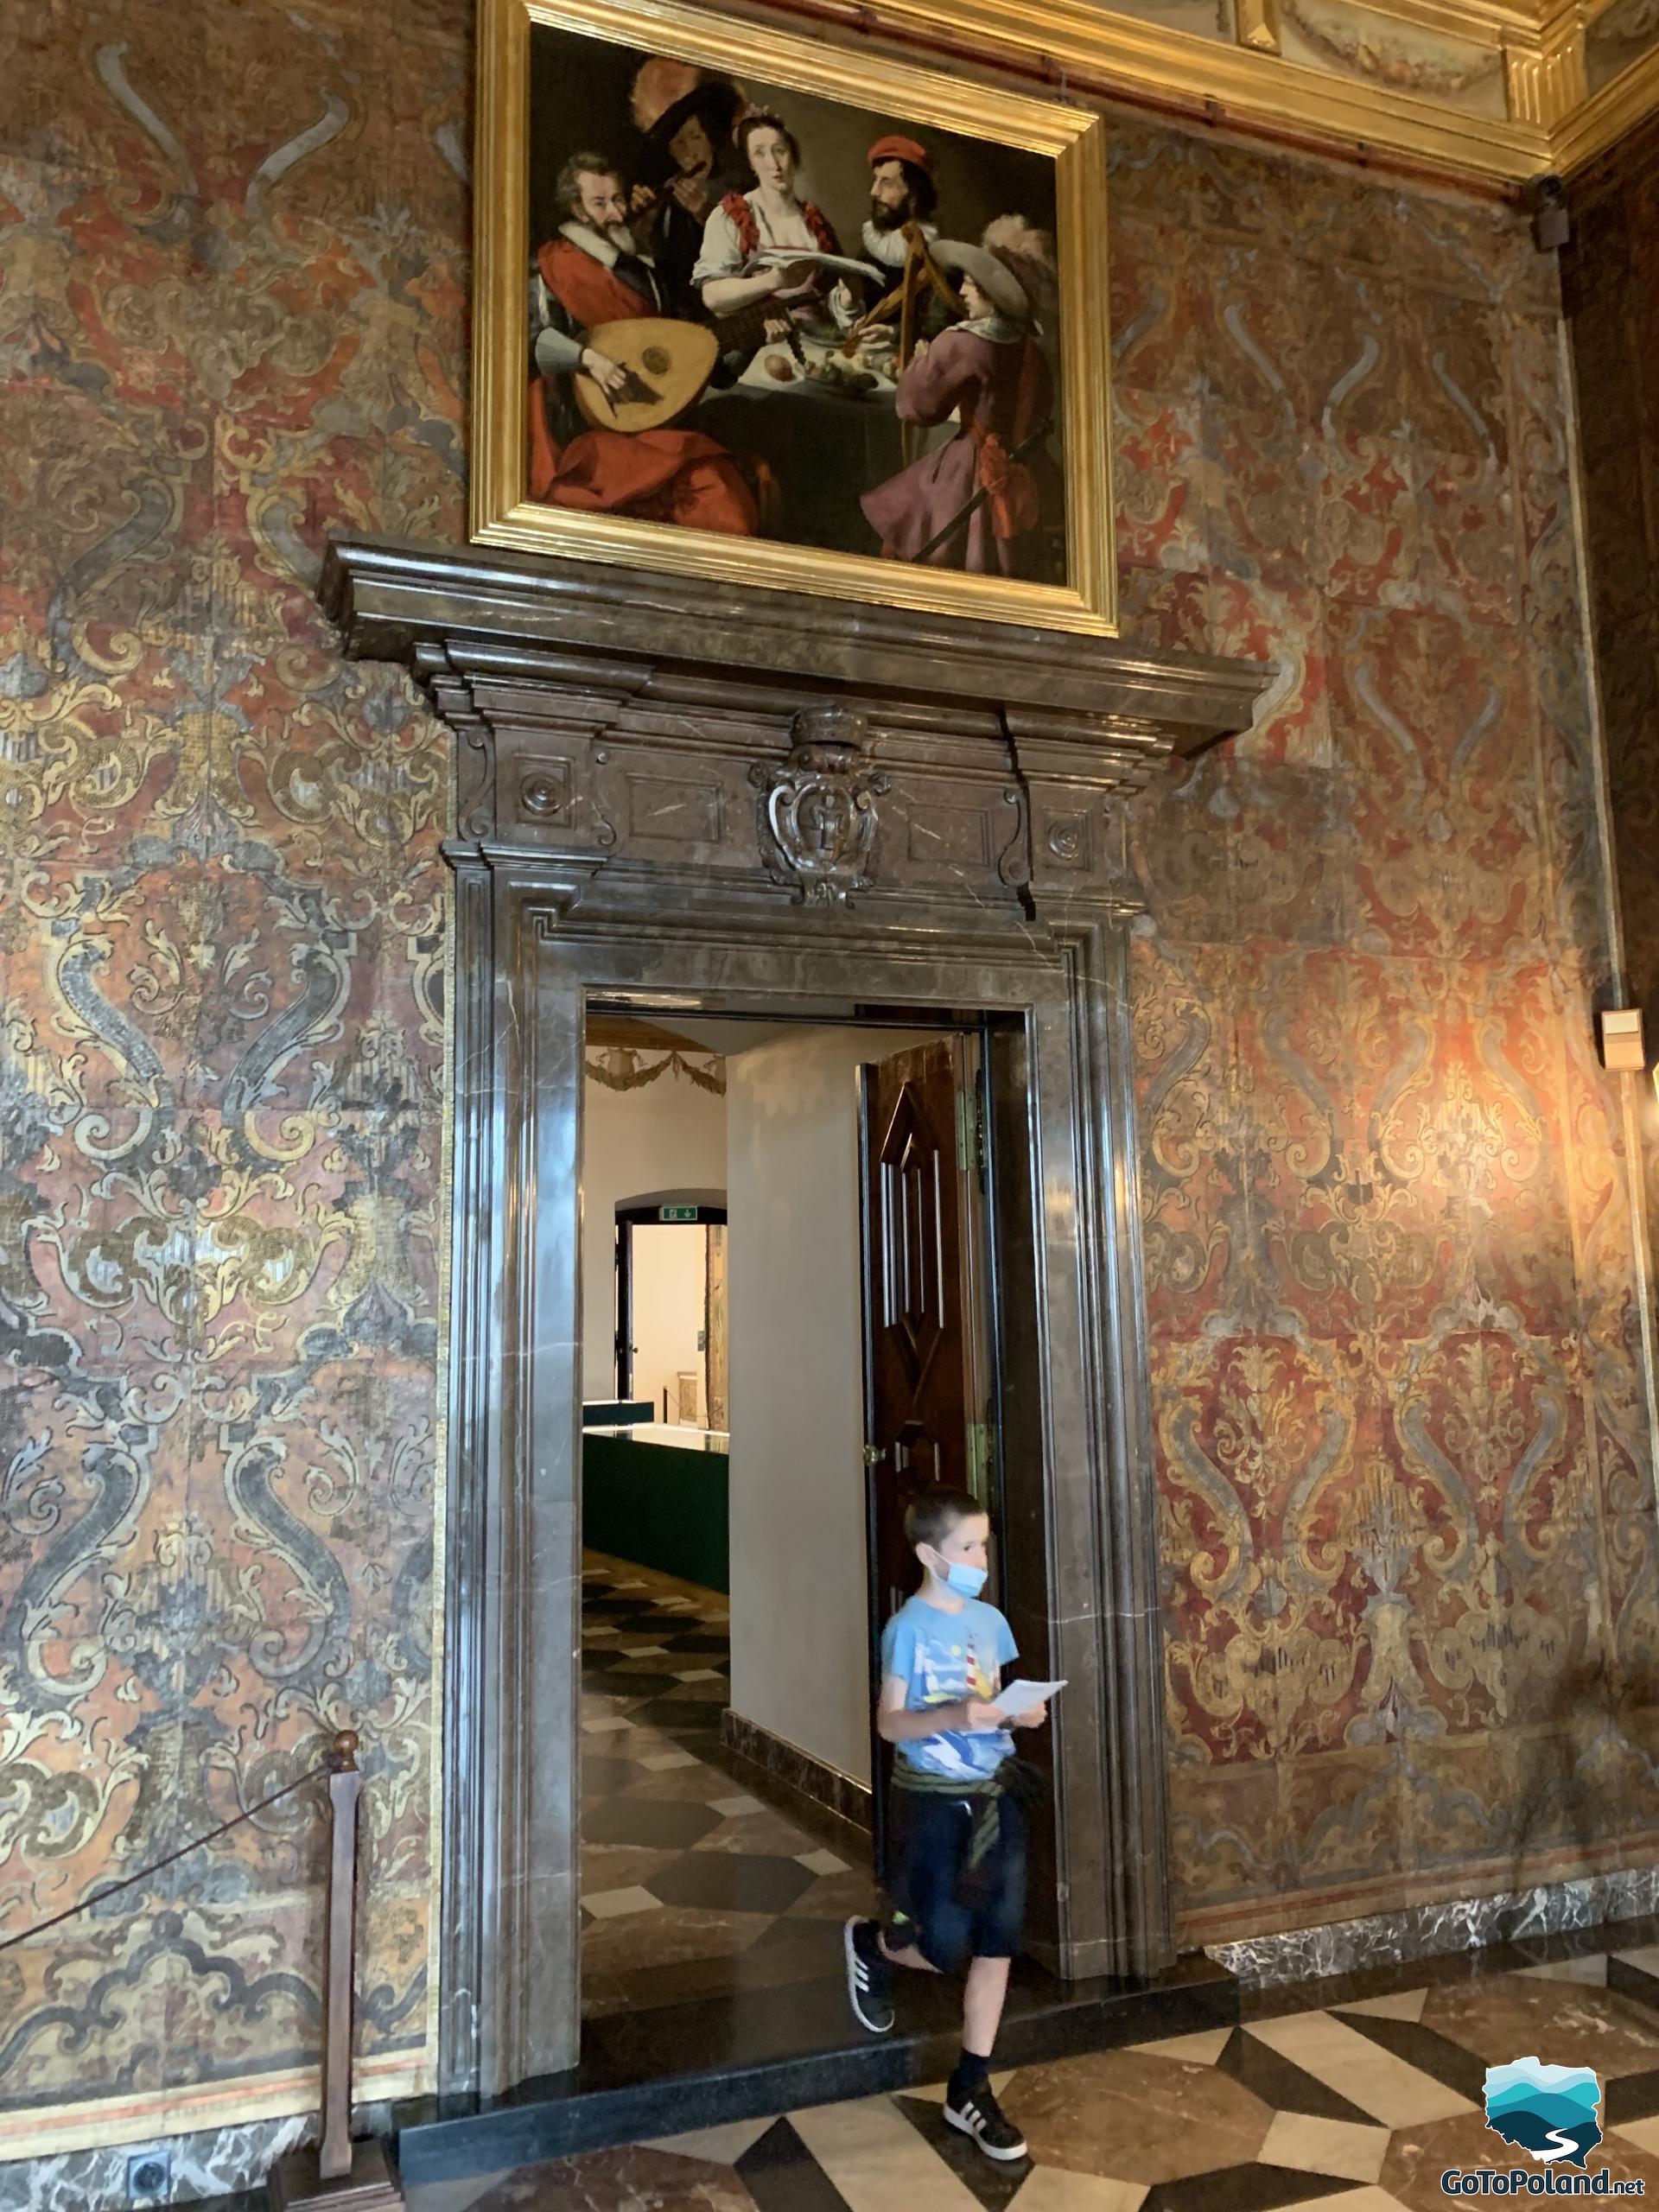 the boy enters the chamber through a large door, the walls are covered with fabrics, wallpaper or paintings, a large picture hangs above the door